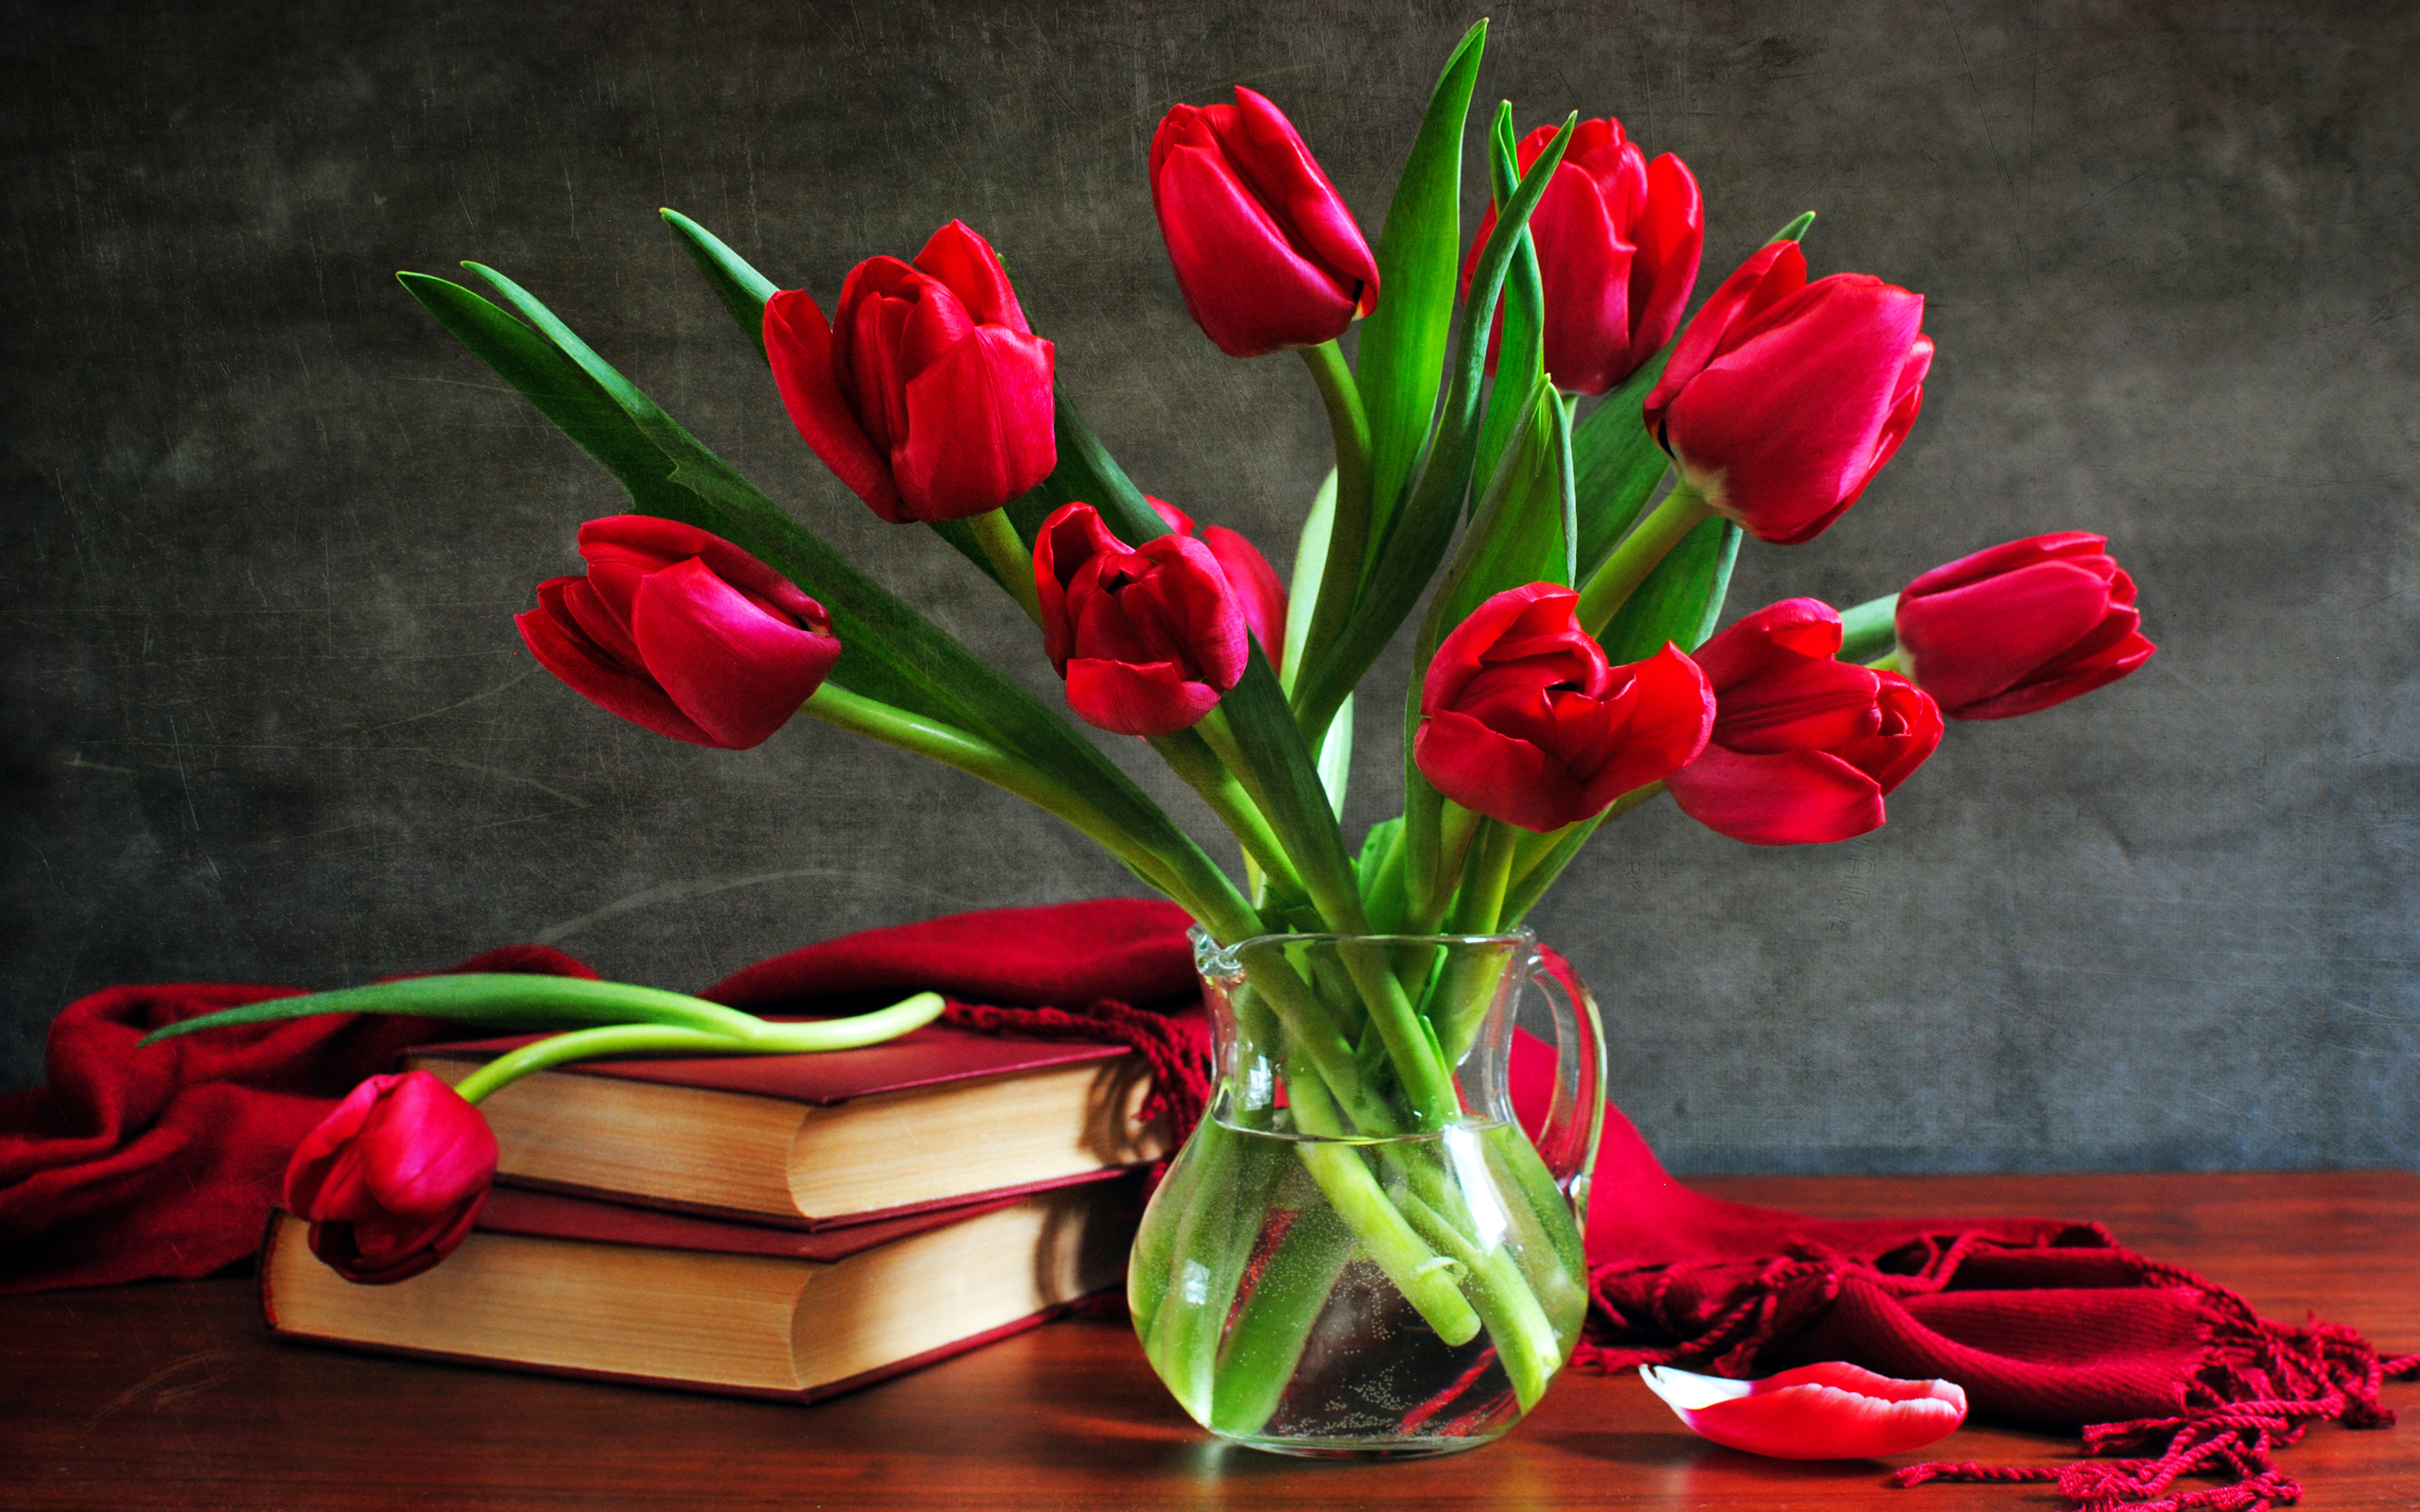 red flower, still life, photography, book, flower, pitcher, scarf, tulip